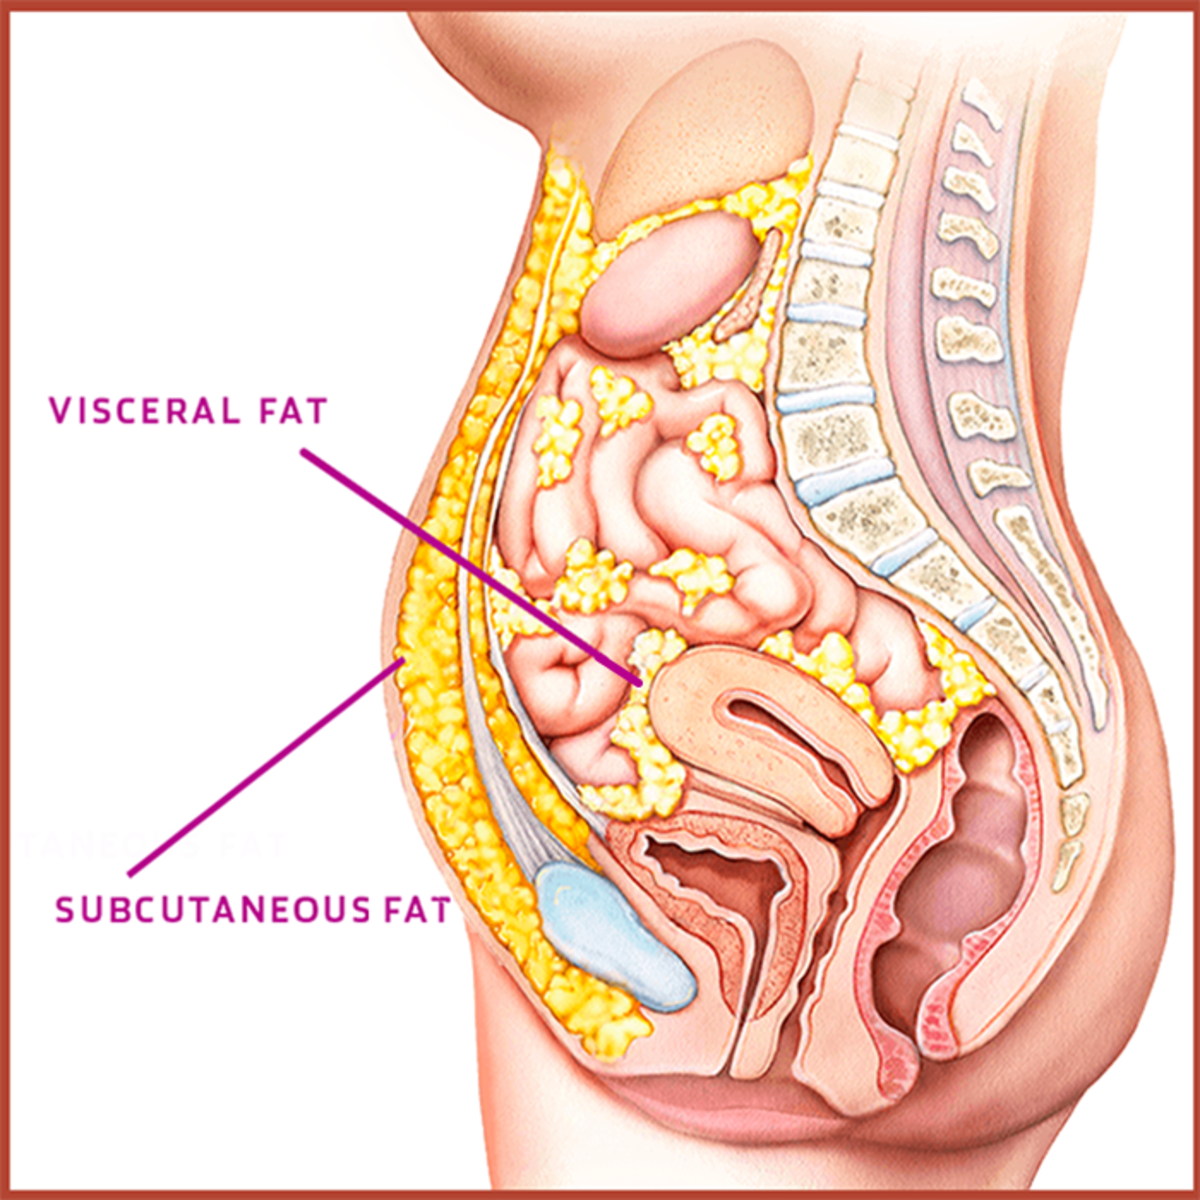 You cannot grip visceral fat but it is still there, deep inside the body.